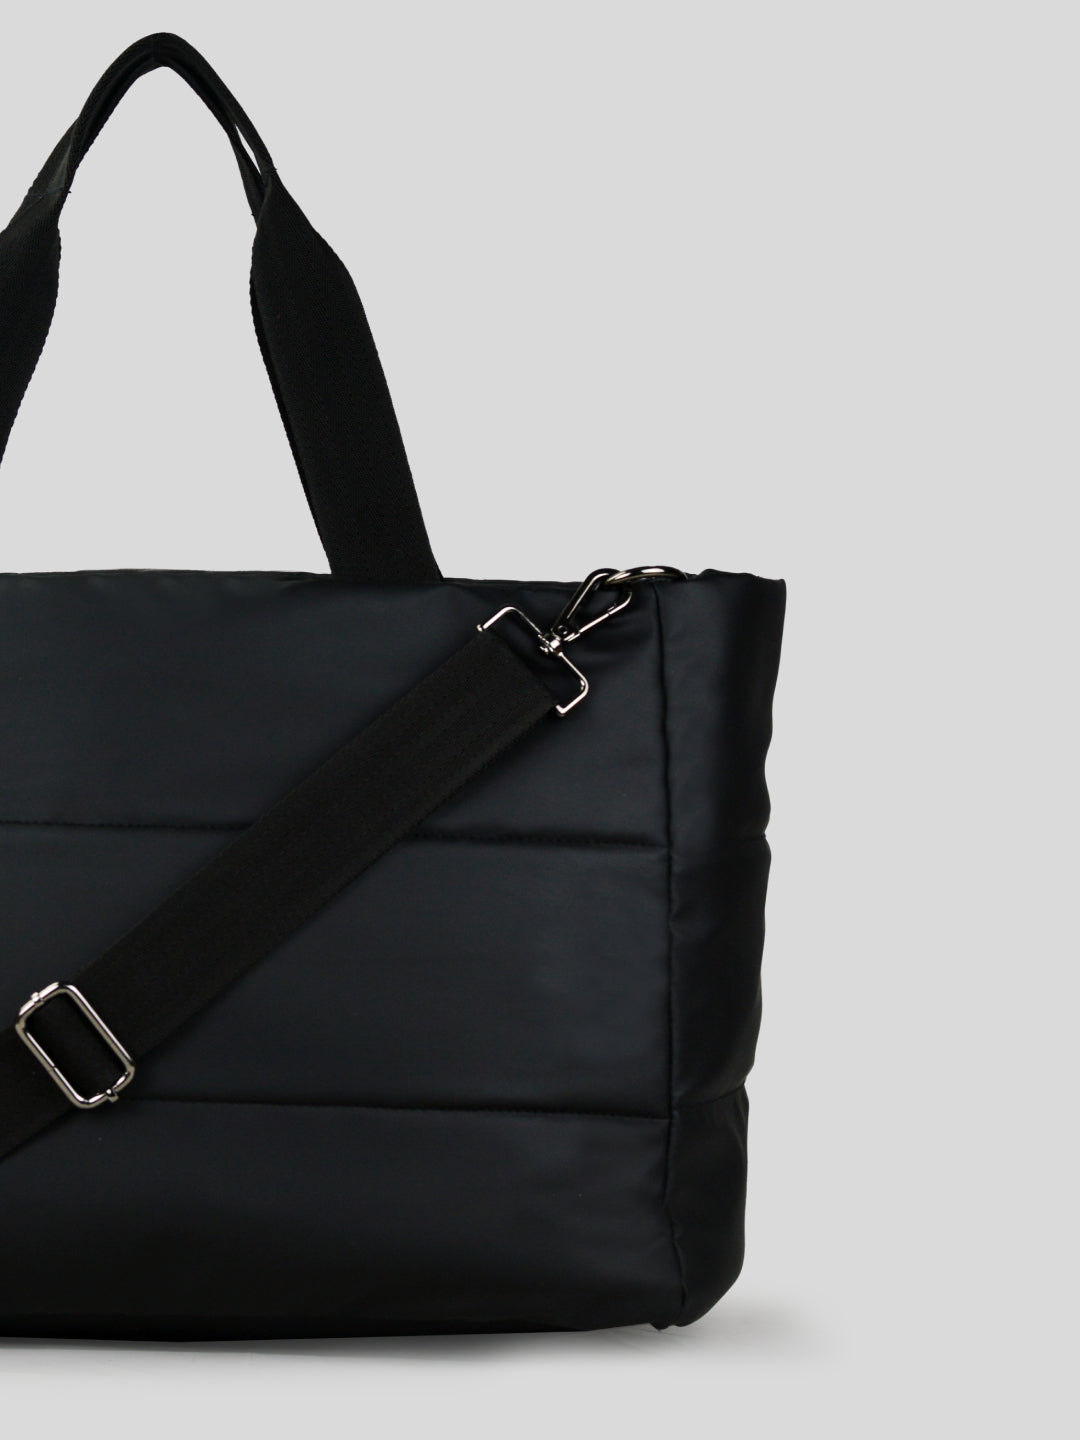 French Connection Black Tote